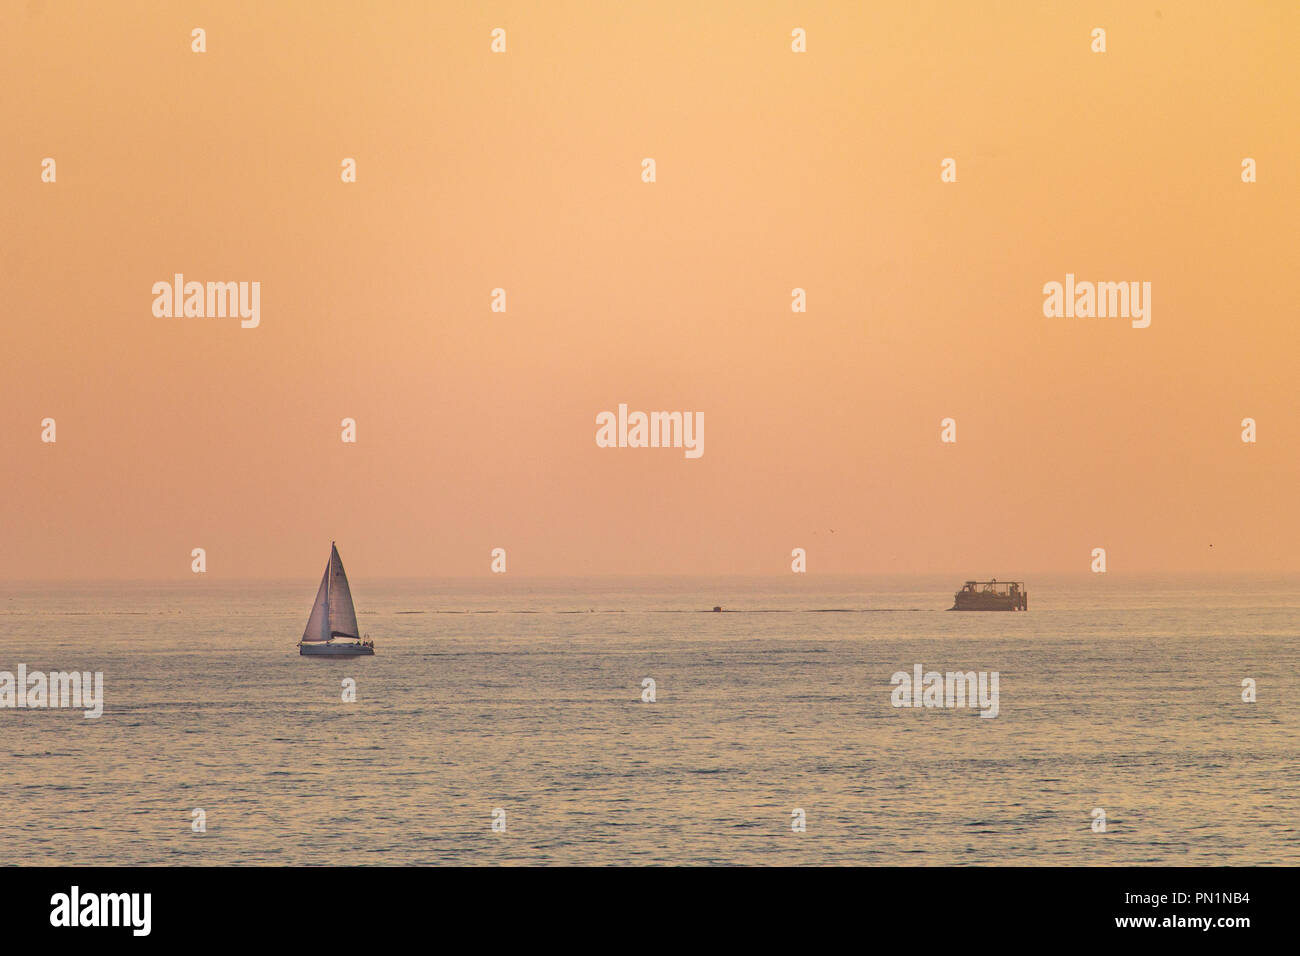 A distant sailboat sails along the sea during sunset, with the orange colored sky in the background. Stock Photo